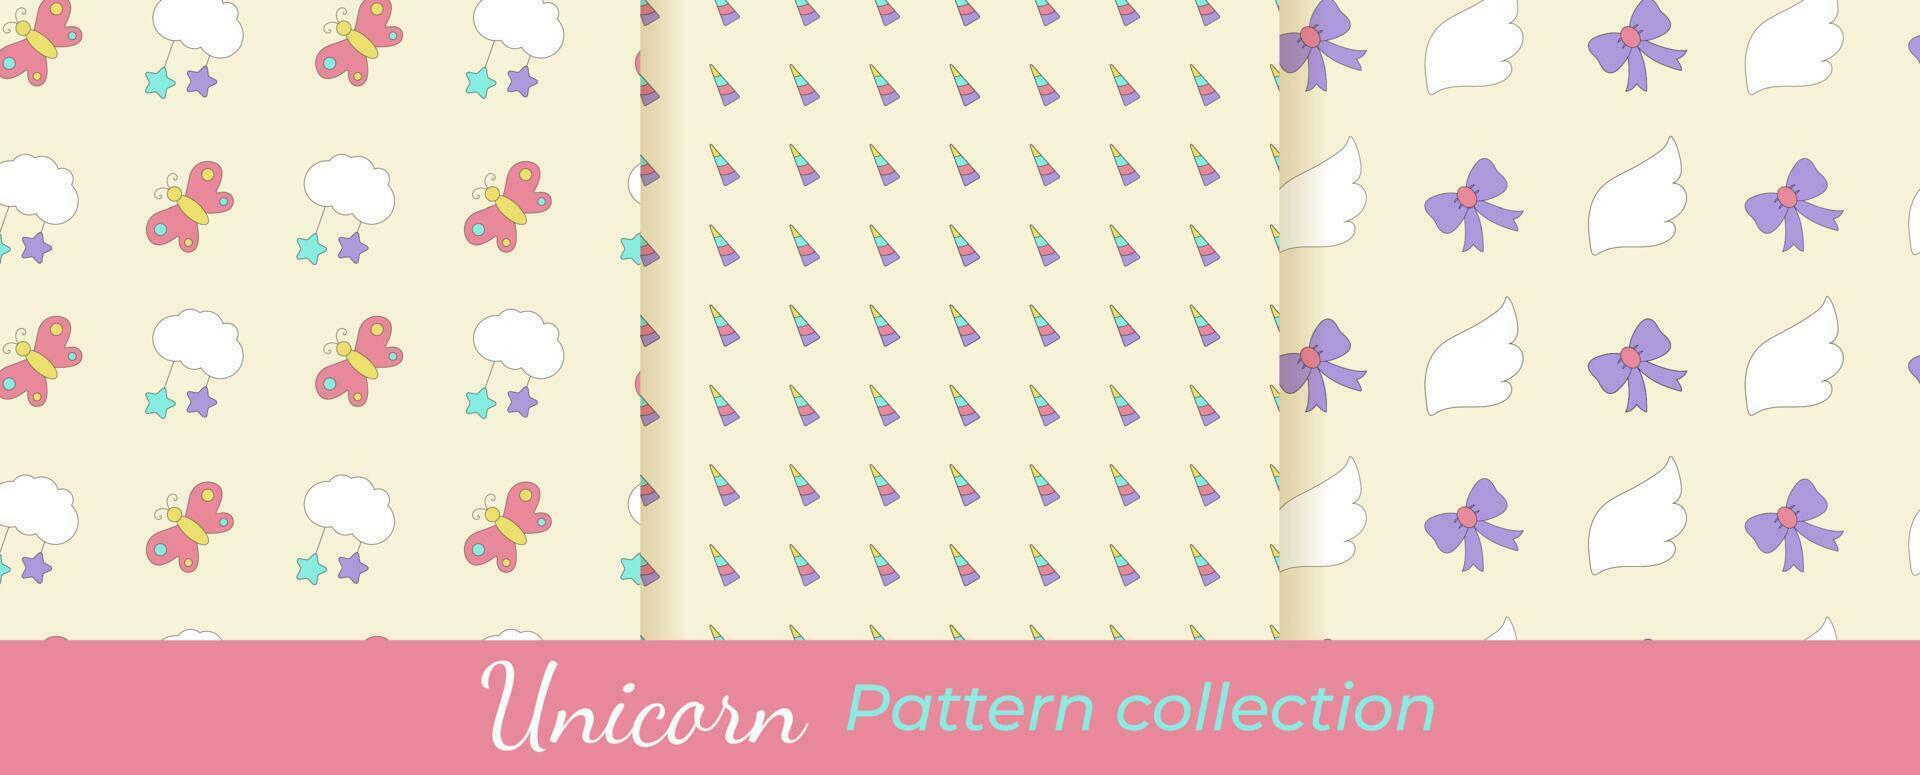 Collection of unicorn patterns. Magical vector patterns set. Seamless patterns with  clouds, horns, butterflies, wings, bows, stars.